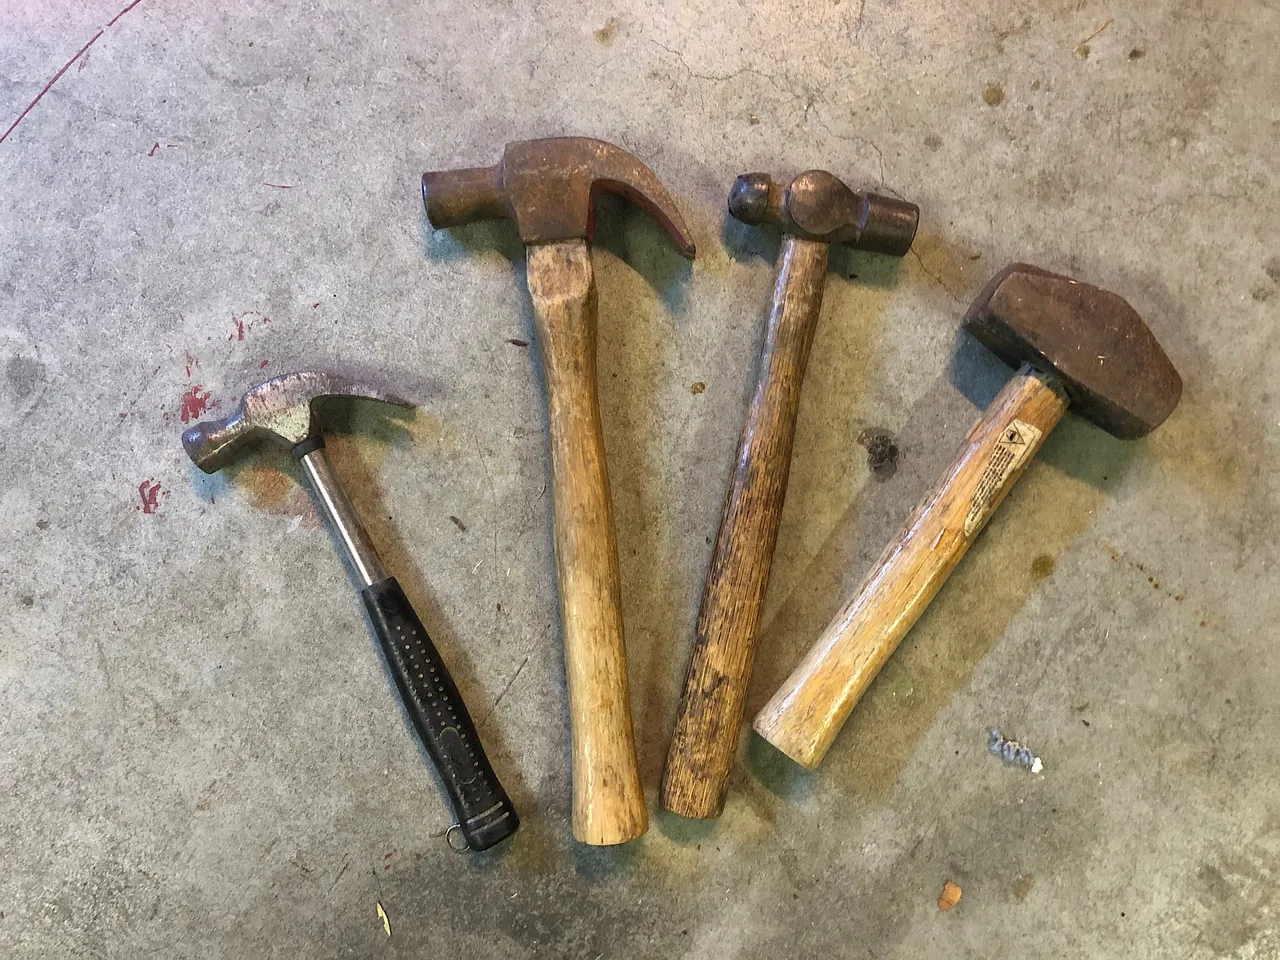 Some of my hammers